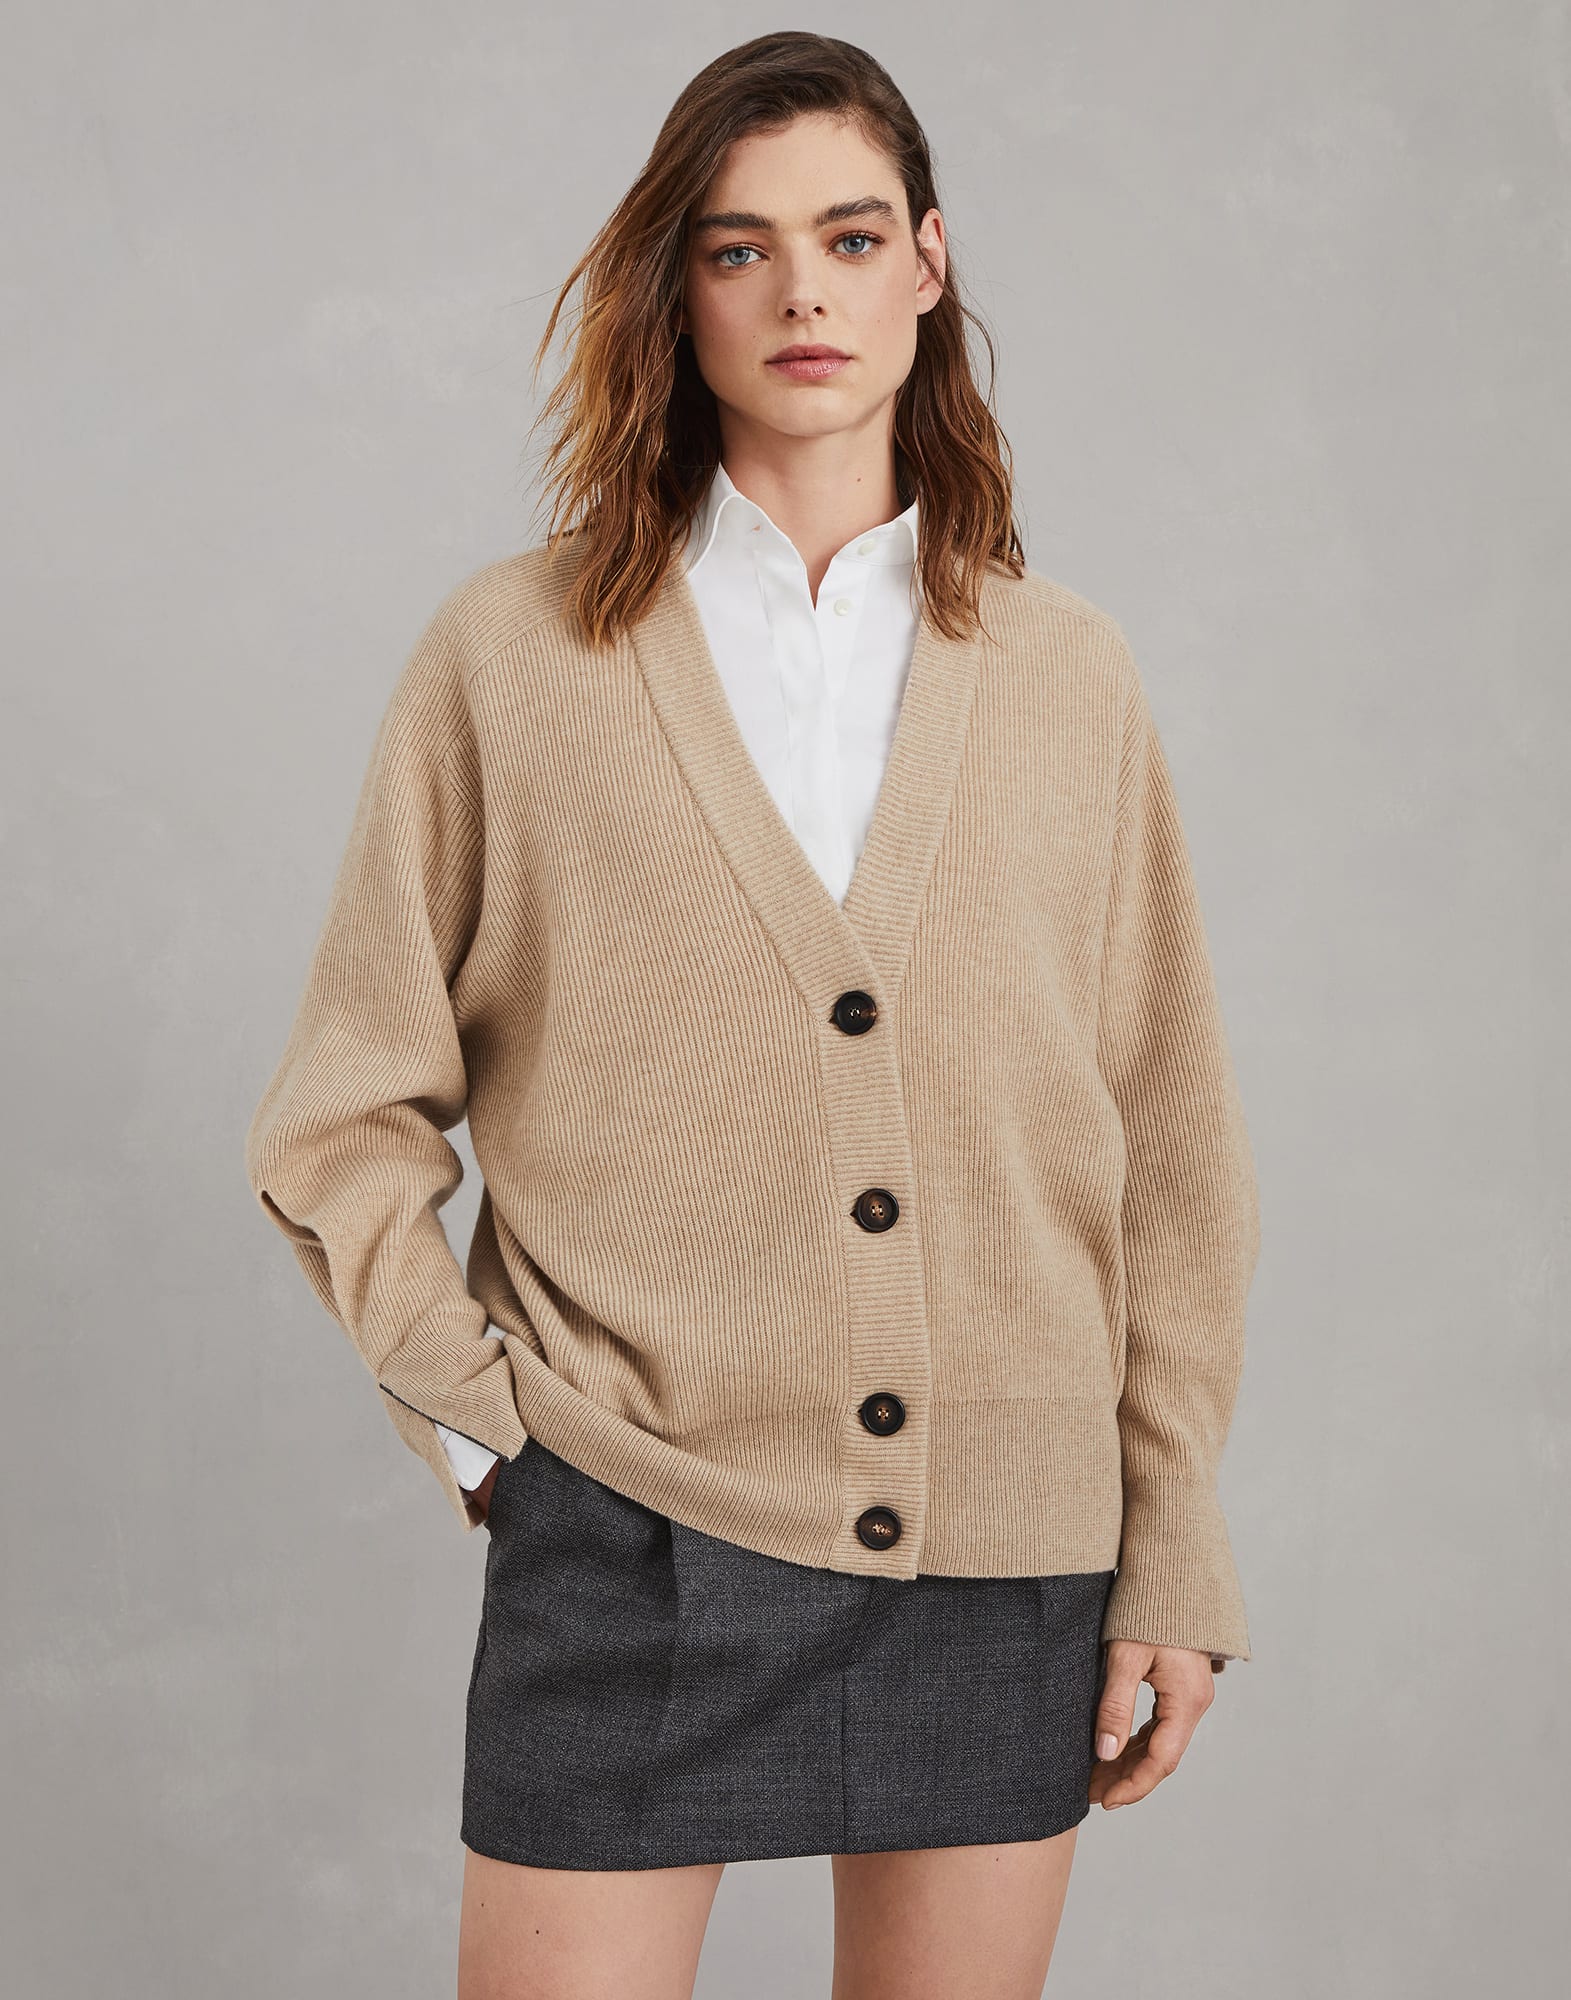 Cardigan - Front view